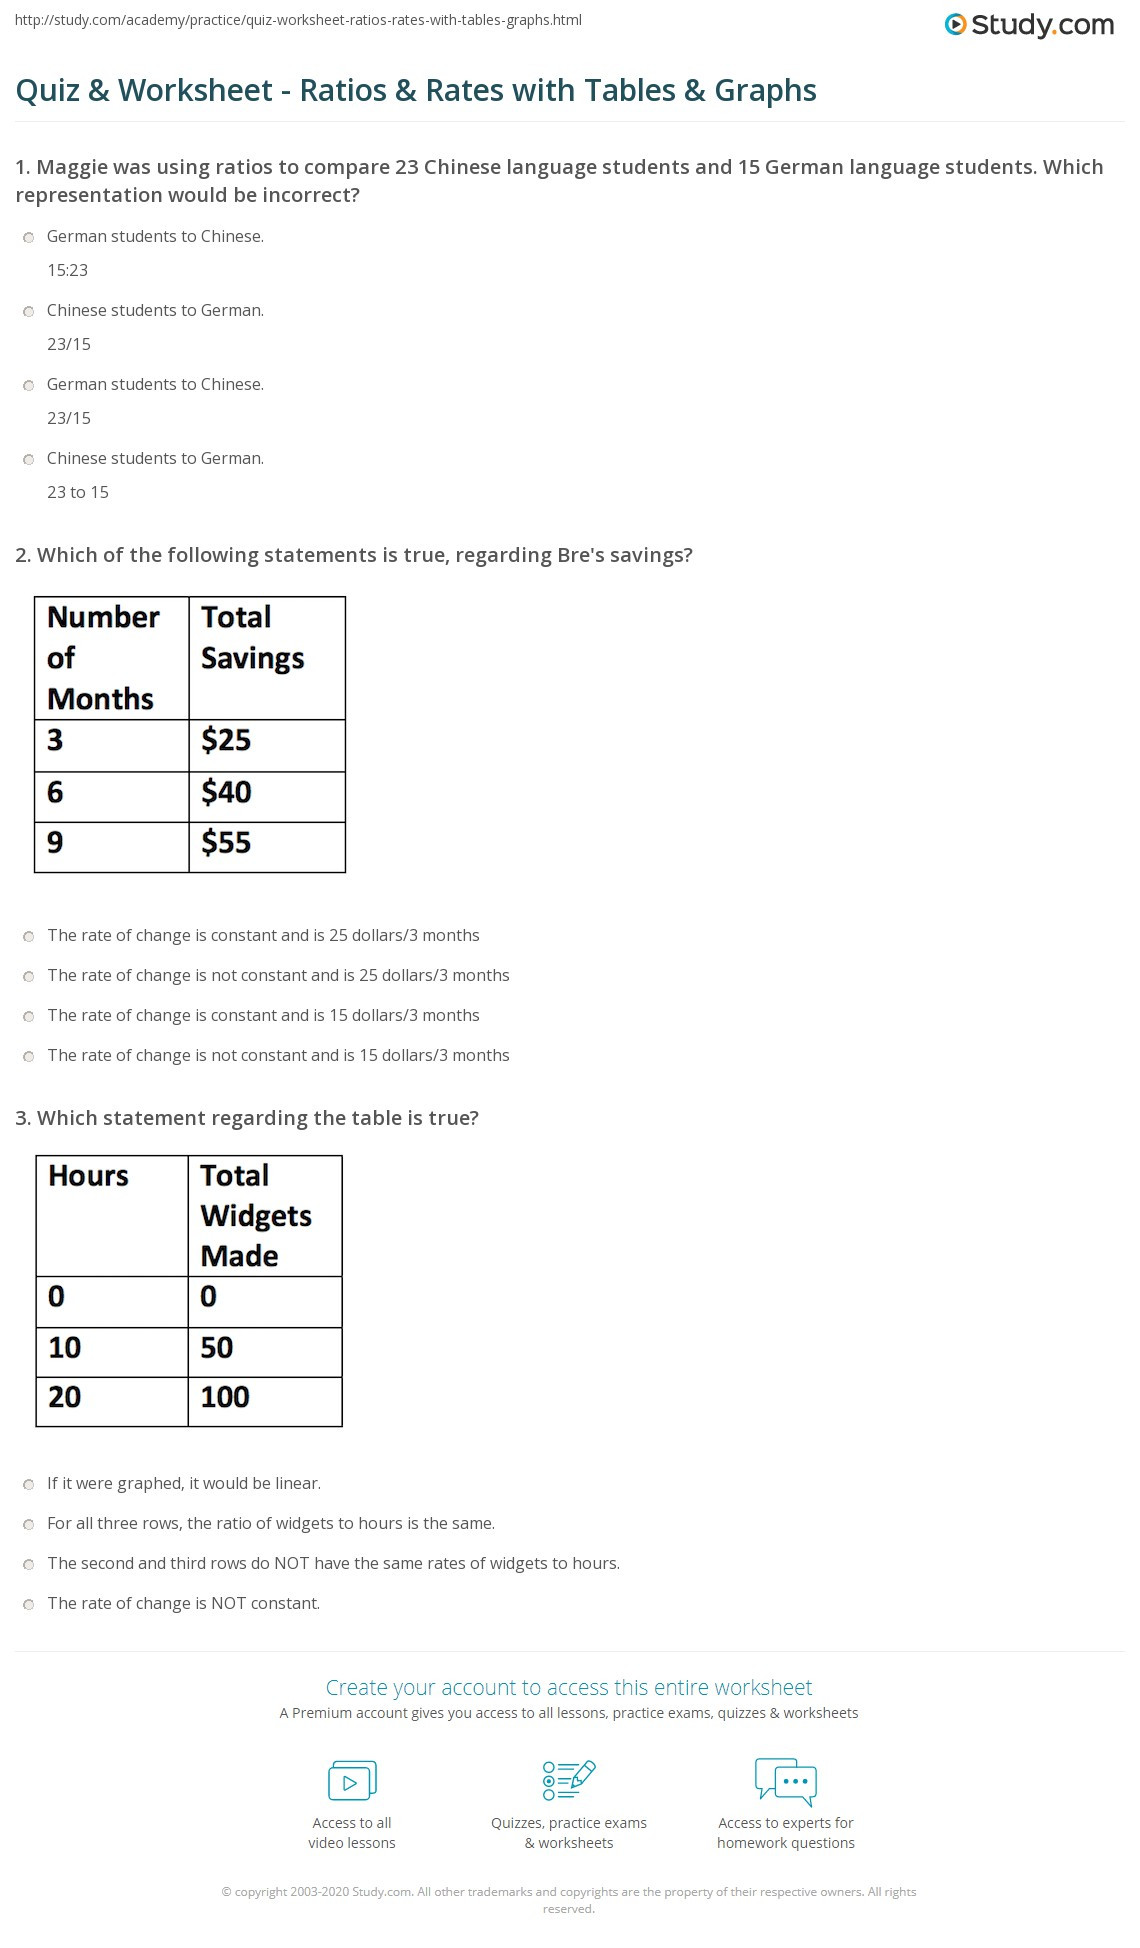 Ratios and Rates Worksheet Quiz &amp; Worksheet Ratios &amp; Rates with Tables &amp; Graphs